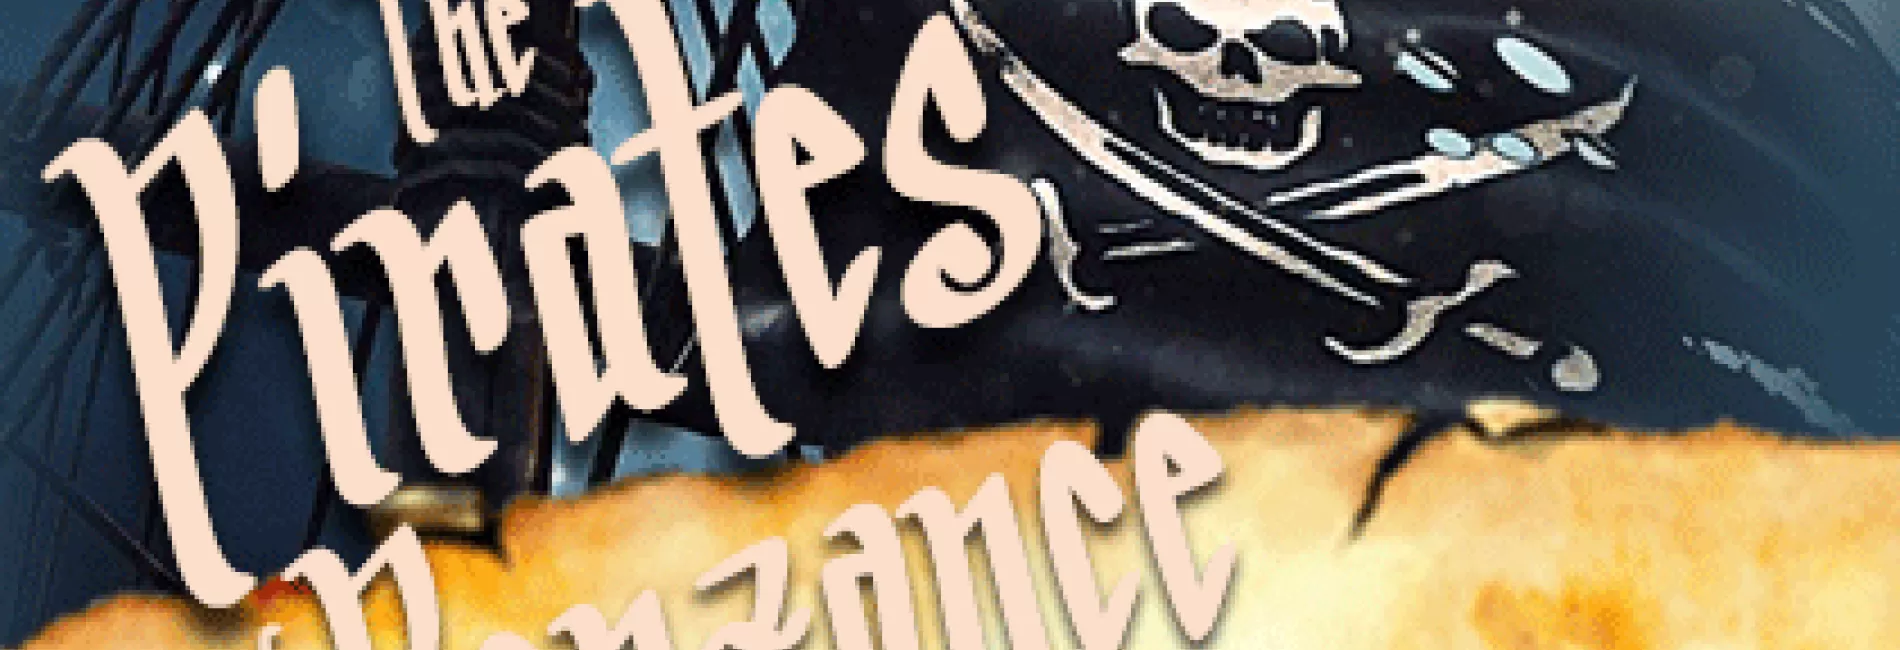 East Coast Matinee Streaming Video of The Pirates of Penzance 8/9/20 at 1 pm NOW ON DEMAND